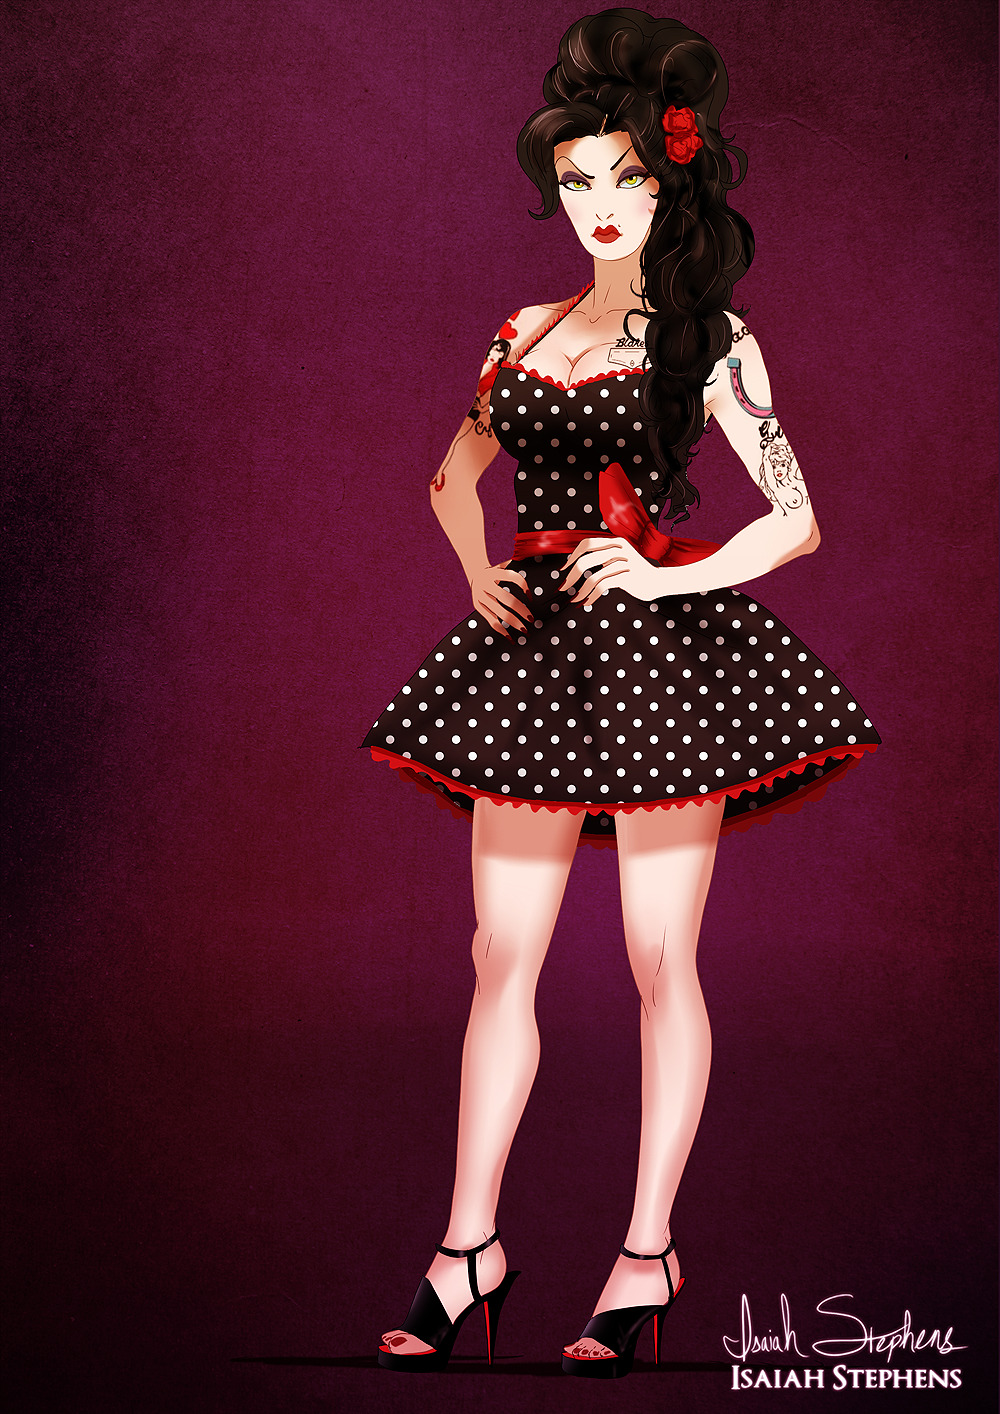 Disney Halloween (2014) Villains Edition
The Evil Queen as Amy WinehouseFor more Disney Halloween, go here!